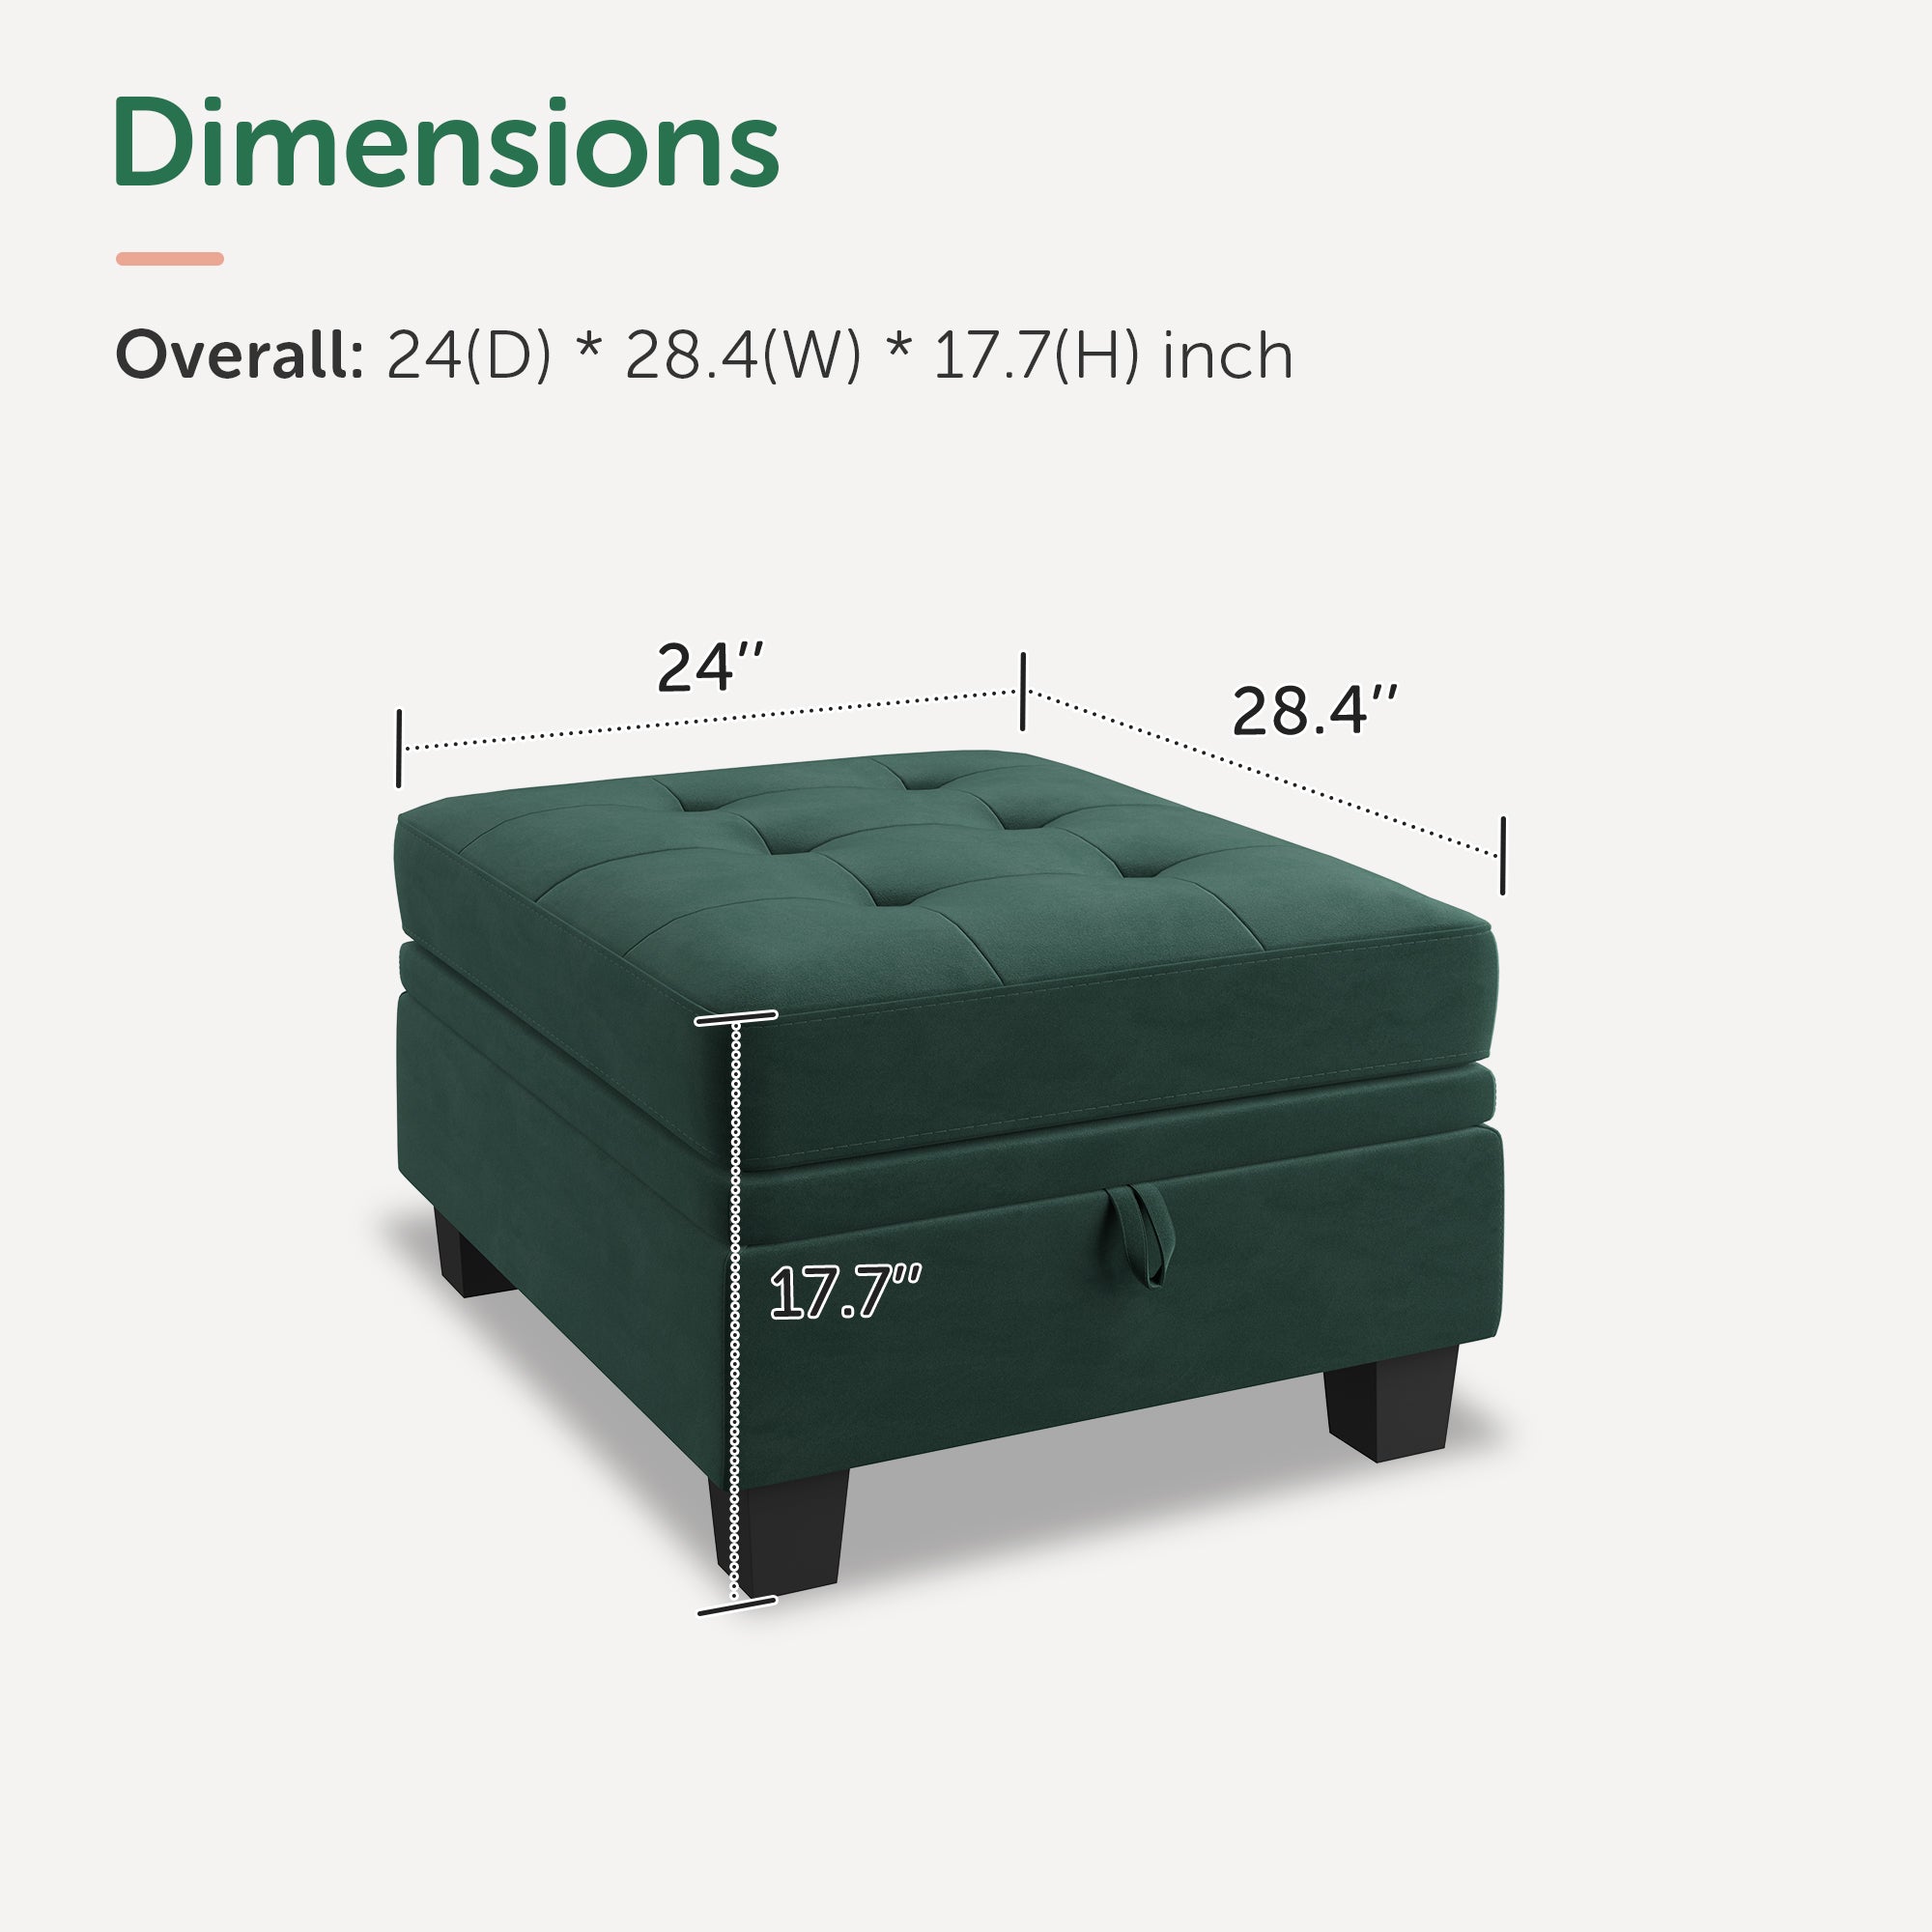 Modular Sectional Storage Ottoman Sale price With Measurements